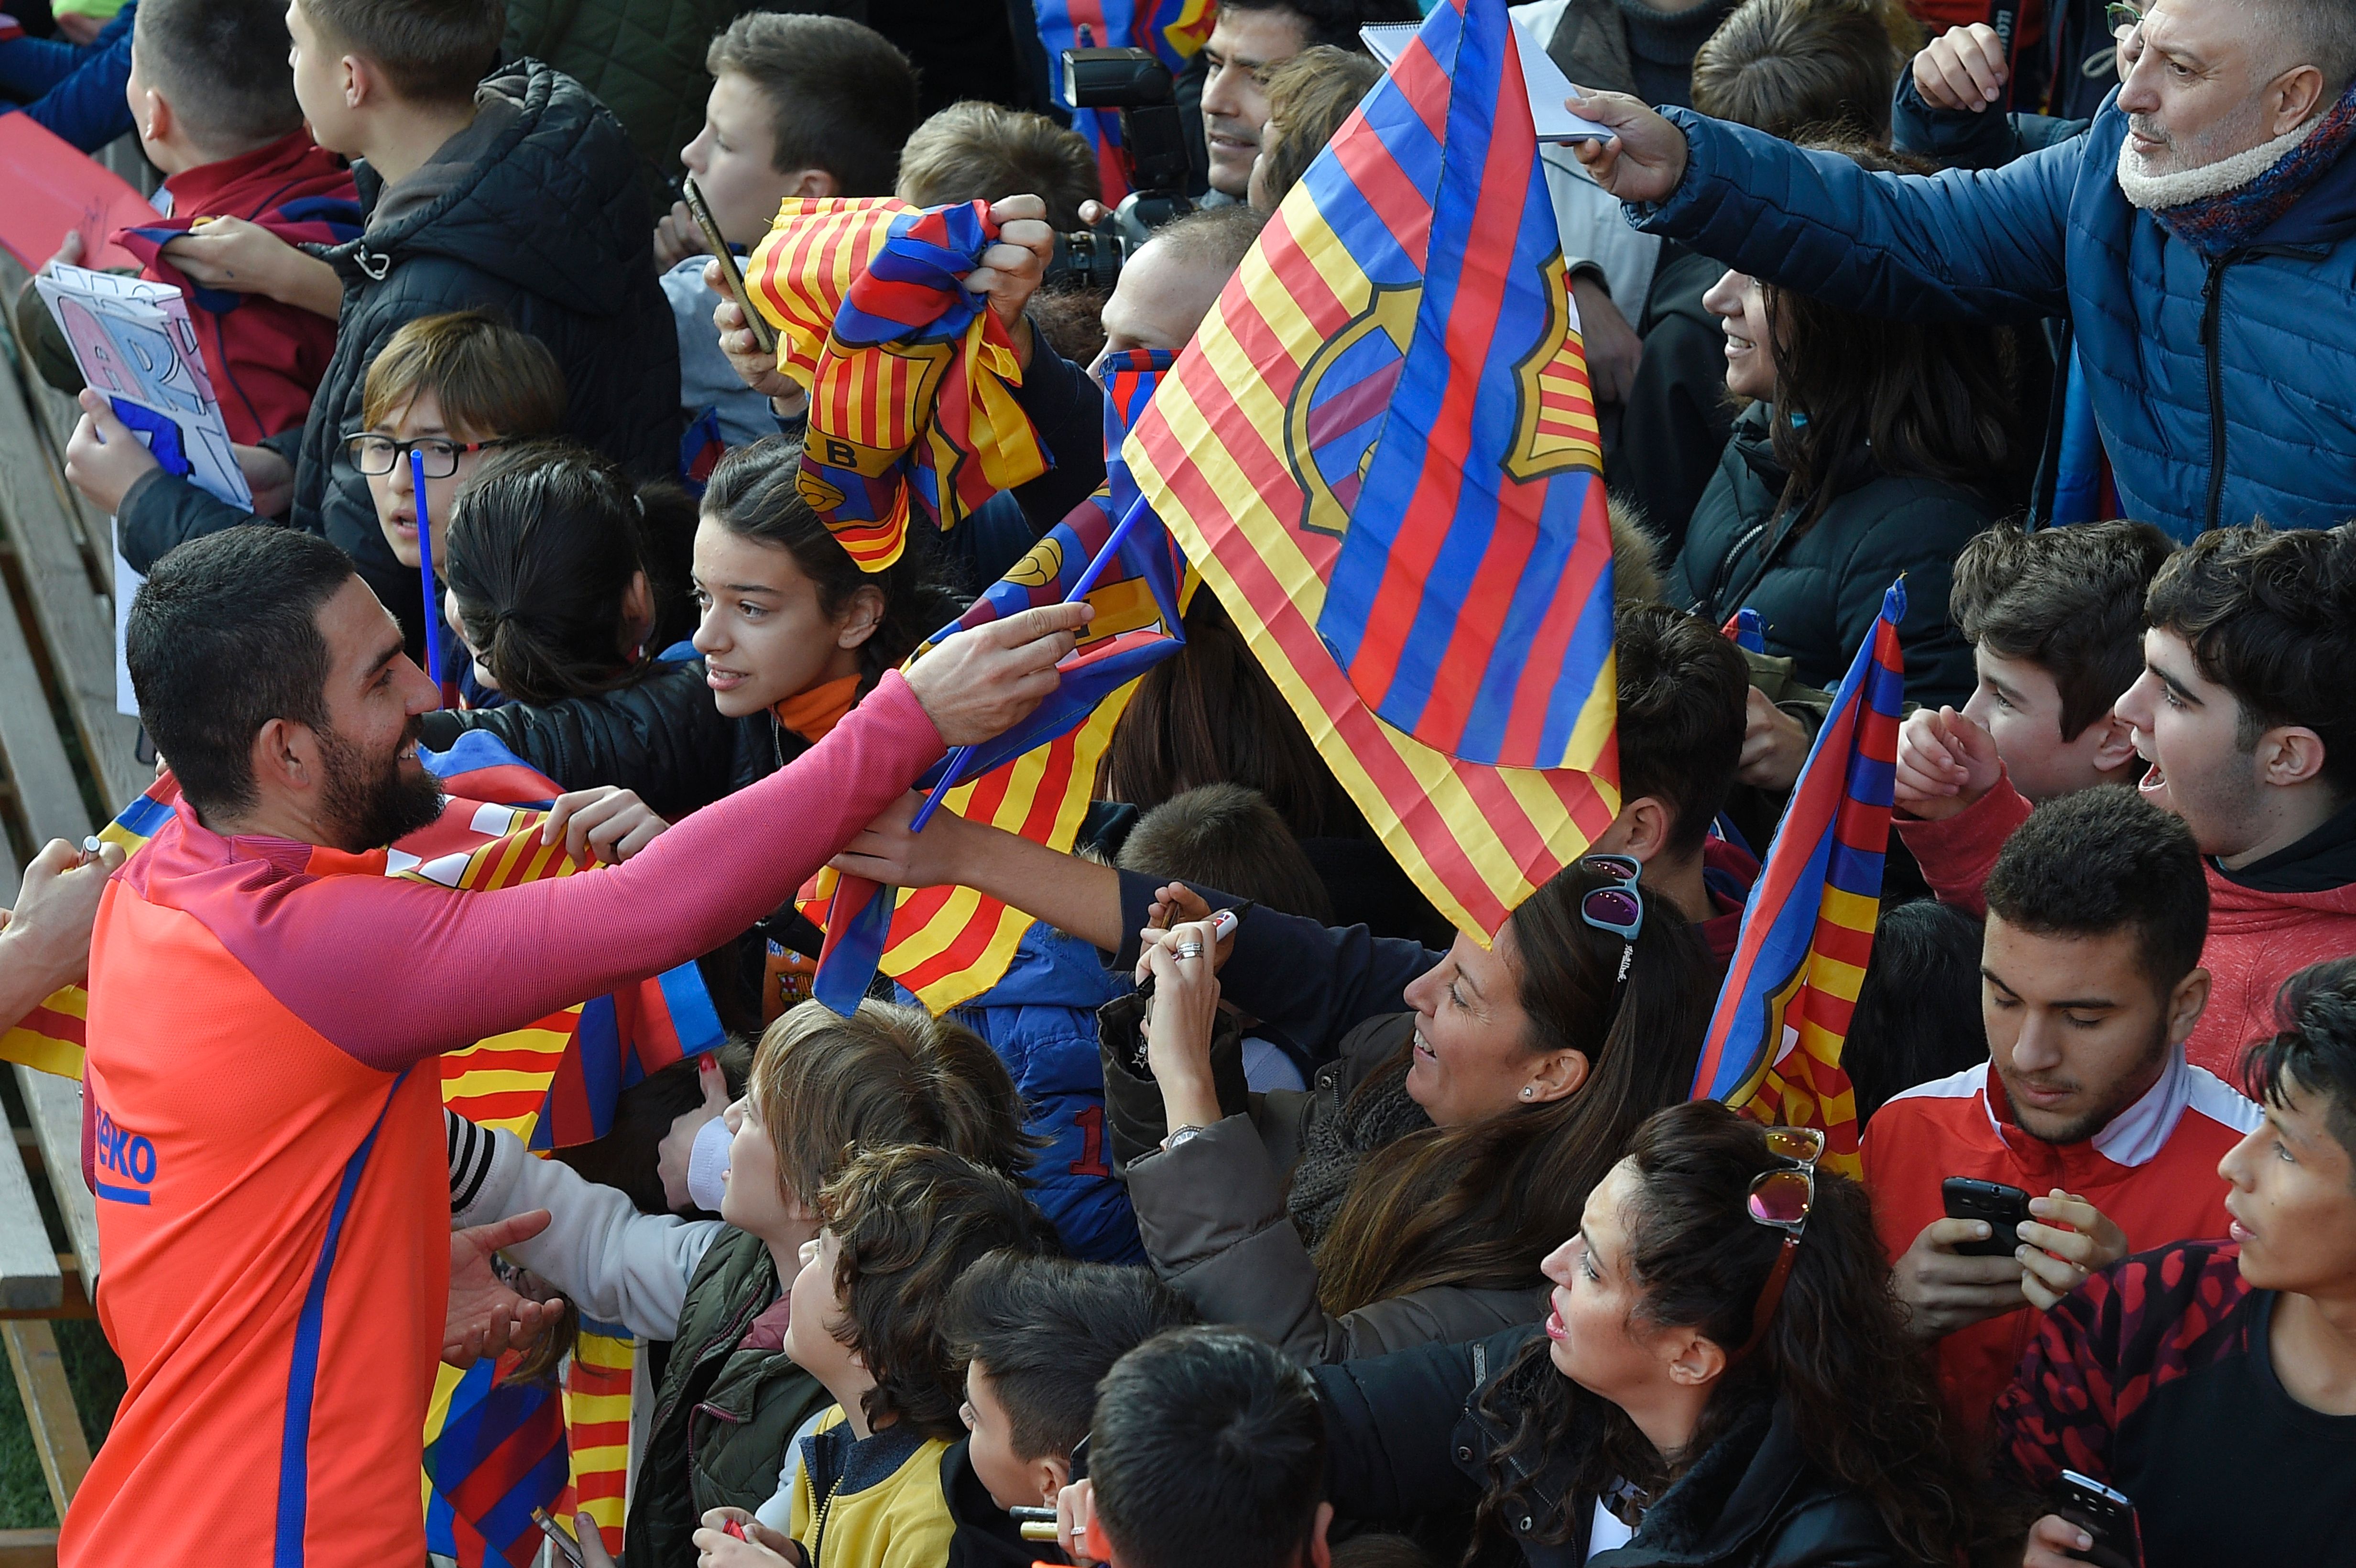 Barcelona's Turkish forward Arda Turan (L) signs autographs at the end of a training session at the Mini stadium in Barcelona on January 3, 2017.
 / AFP / LLUIS GENE        (Photo credit should read LLUIS GENE/AFP/Getty Images)